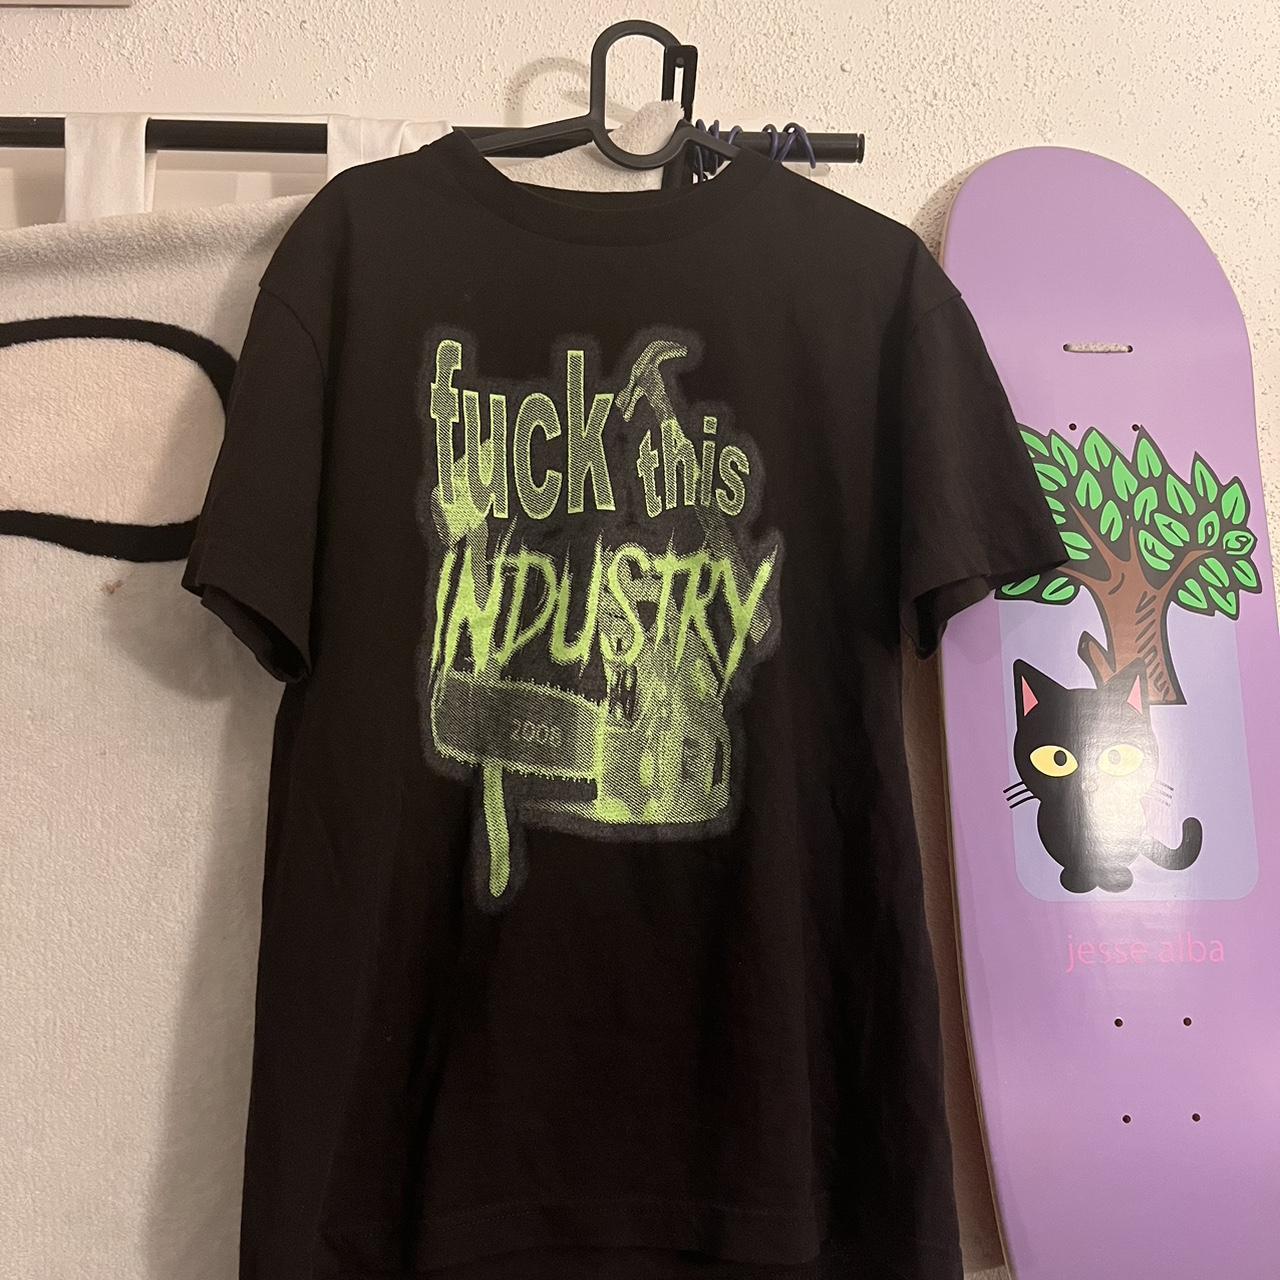 Fuck this industry glow in the dark fti shirt...